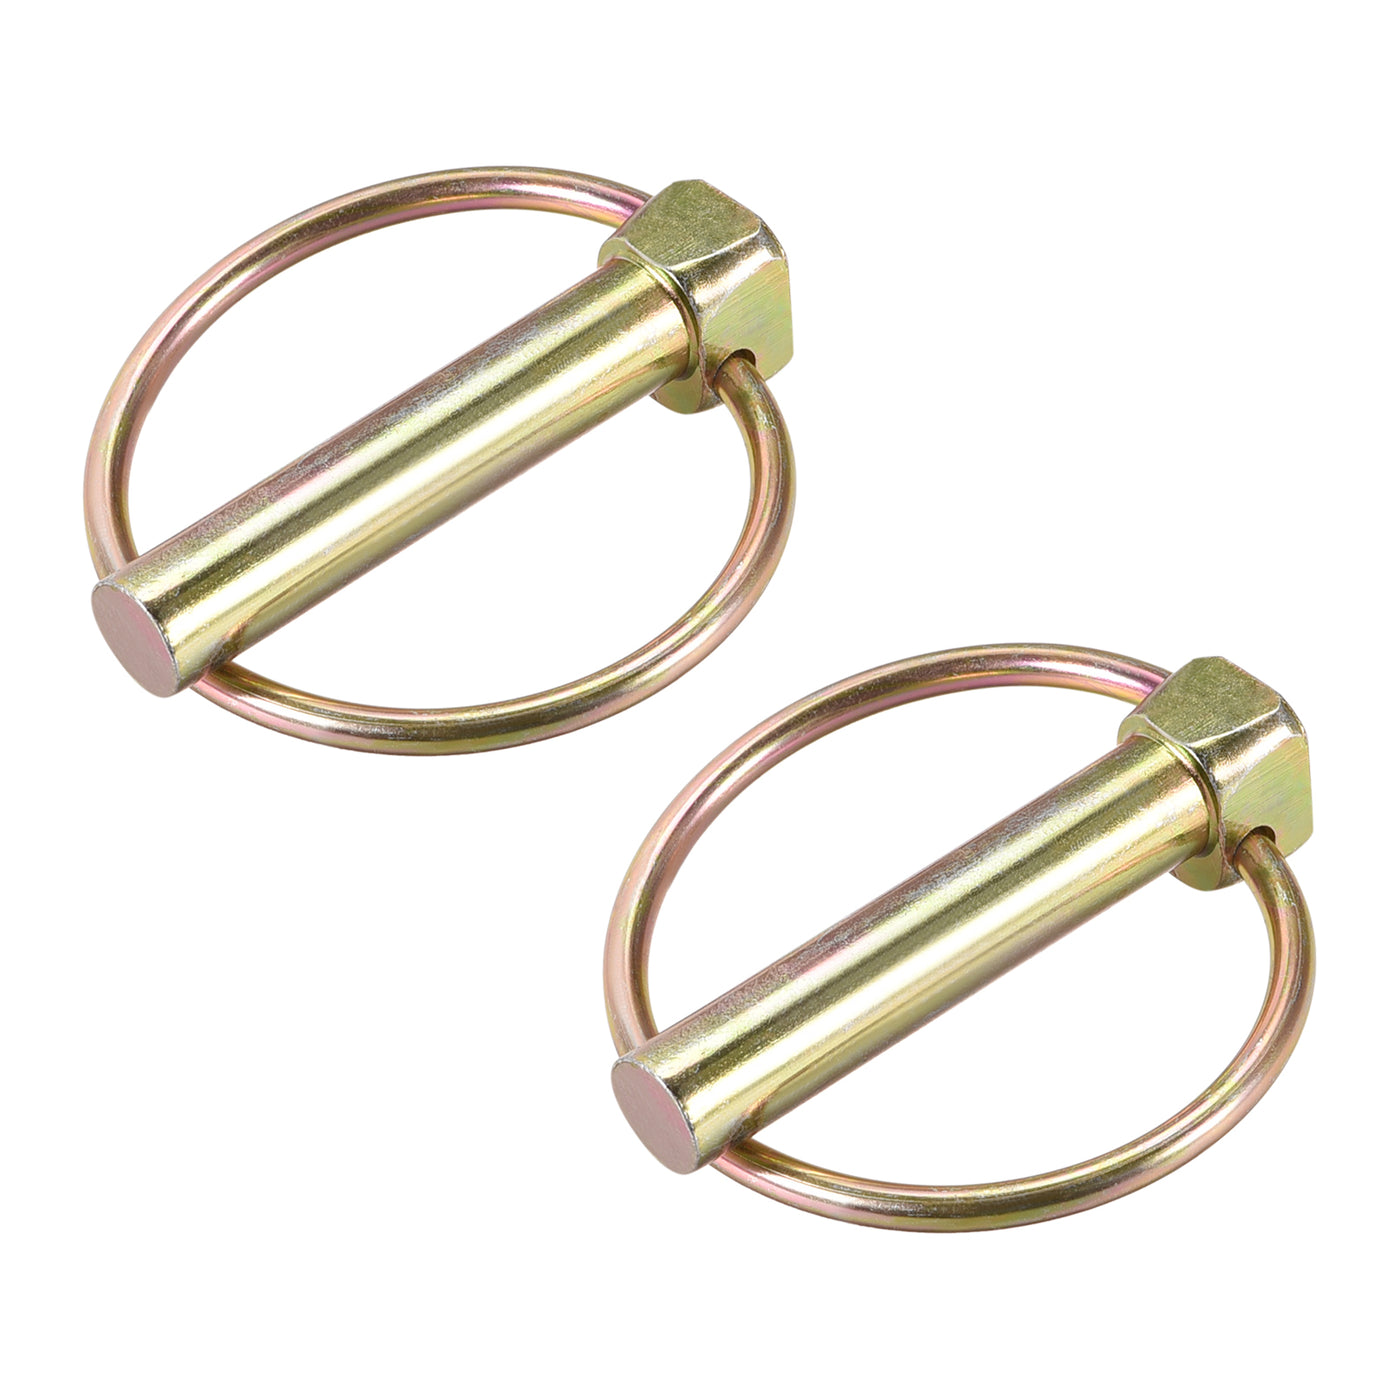 uxcell Uxcell 2Pcs 3/8" x 2-3/4" Linch Pin with Ring for Boat Kayak Canoe